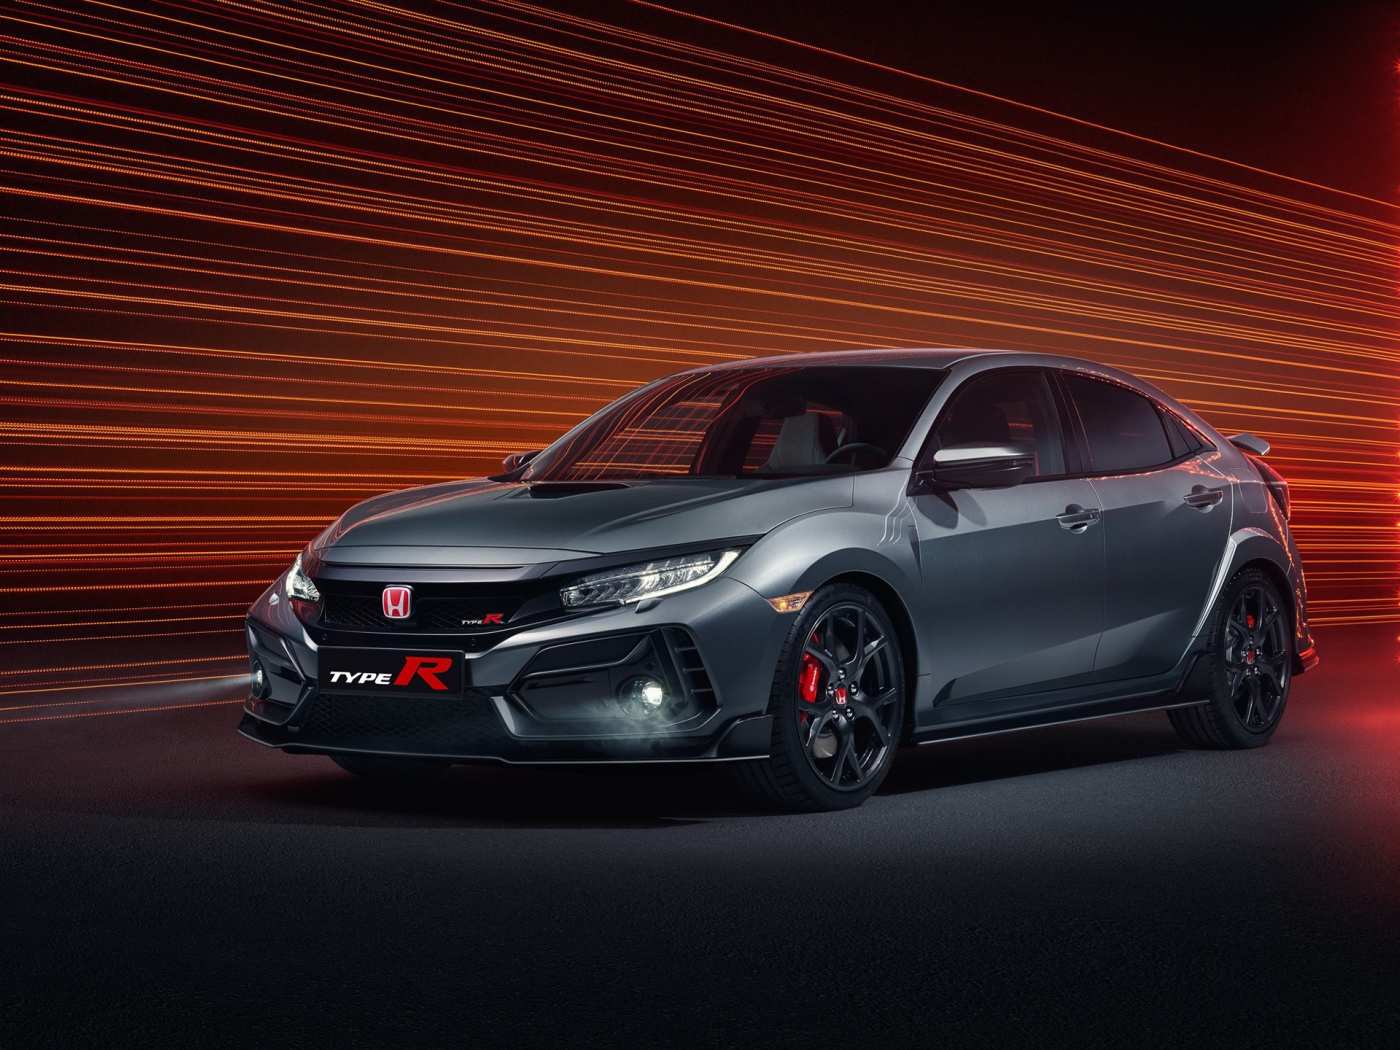 2020 silver car Honda Civic Type R Sport Line on a background of rays